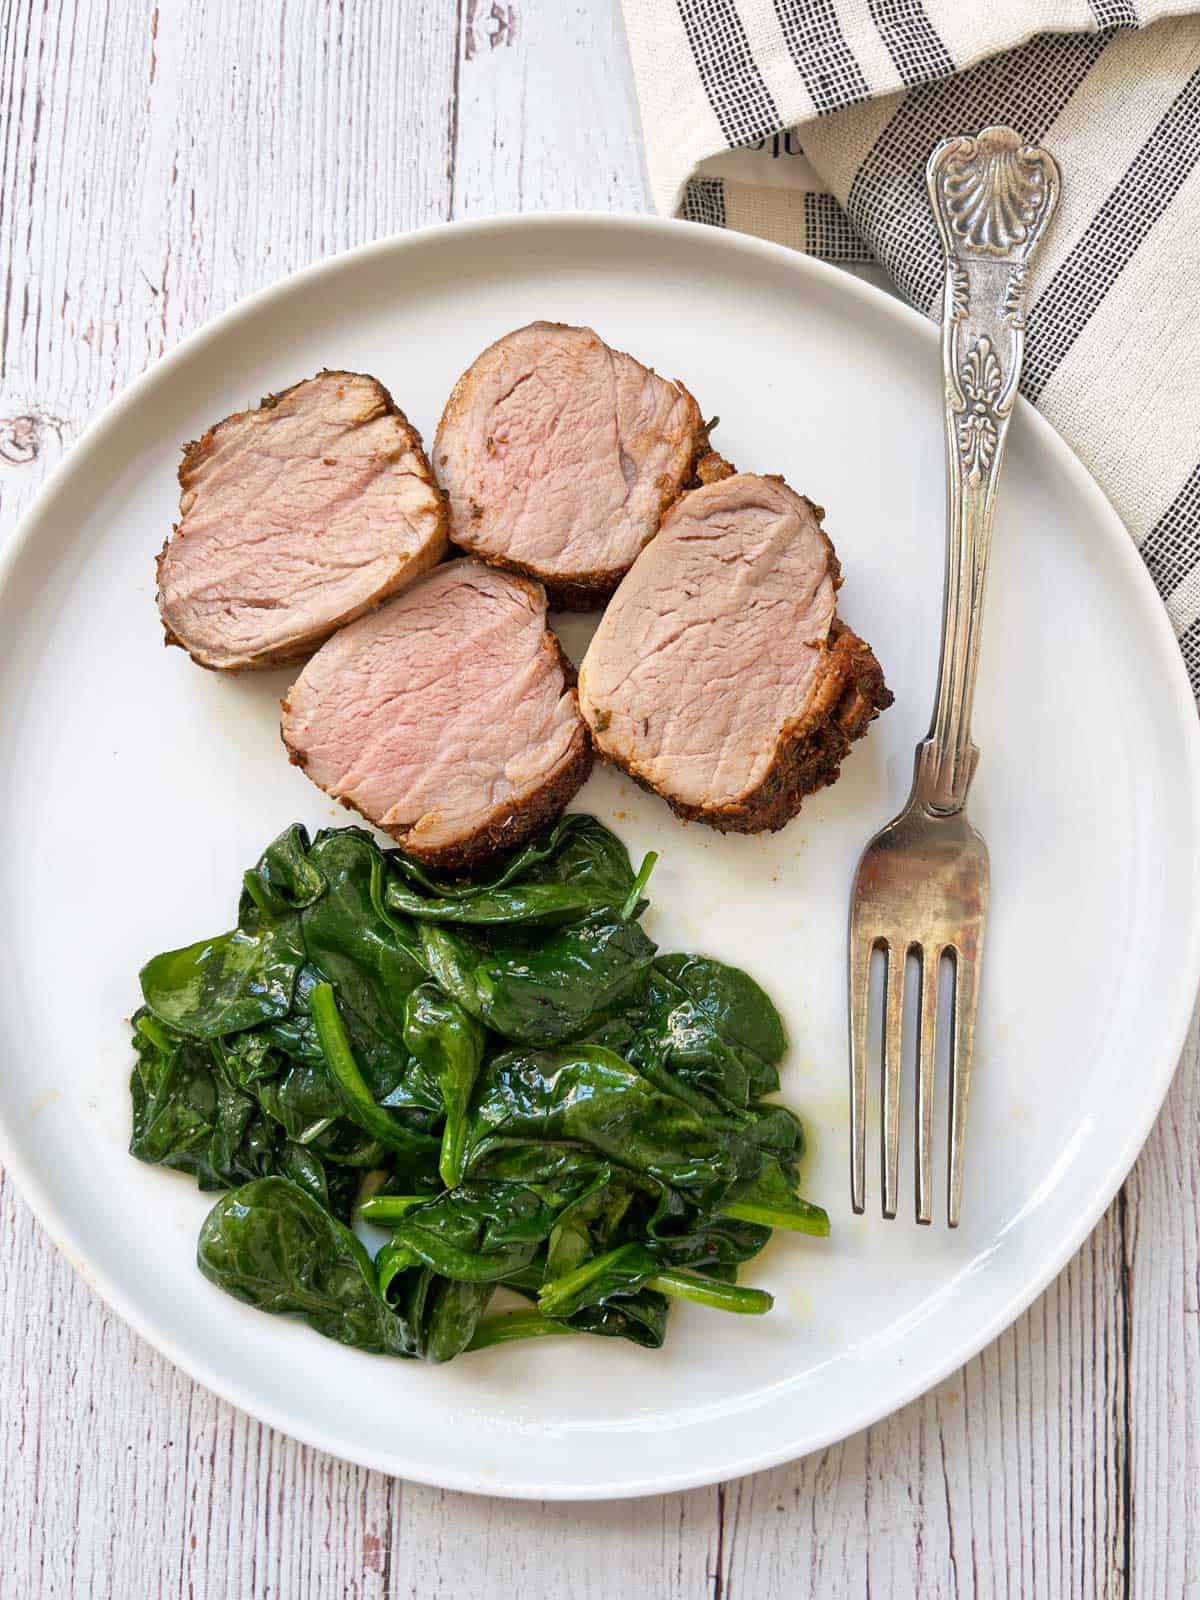 Slices of roasted pork tenderloin are served with sauteed spinach.